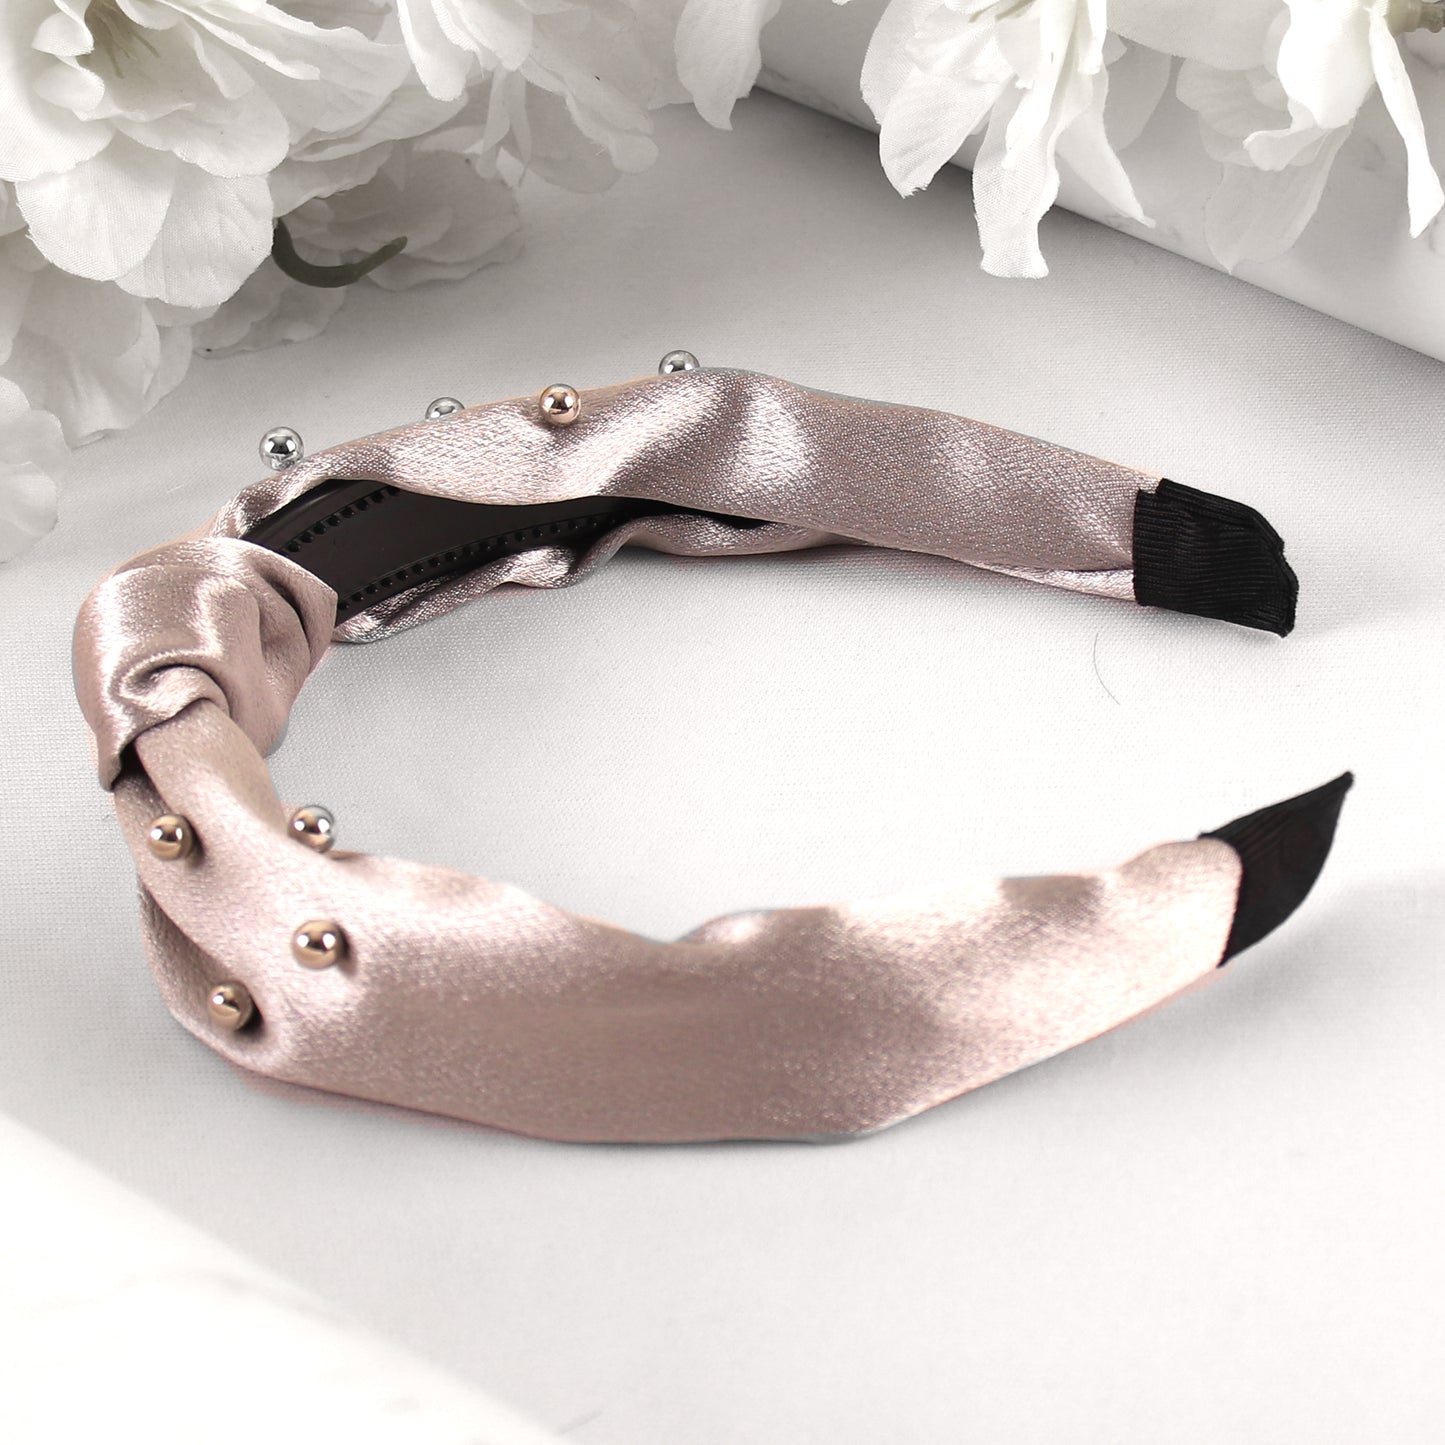 HairBand,The Hair Flair Satin Hair Band in Grey - Cippele Multi Store